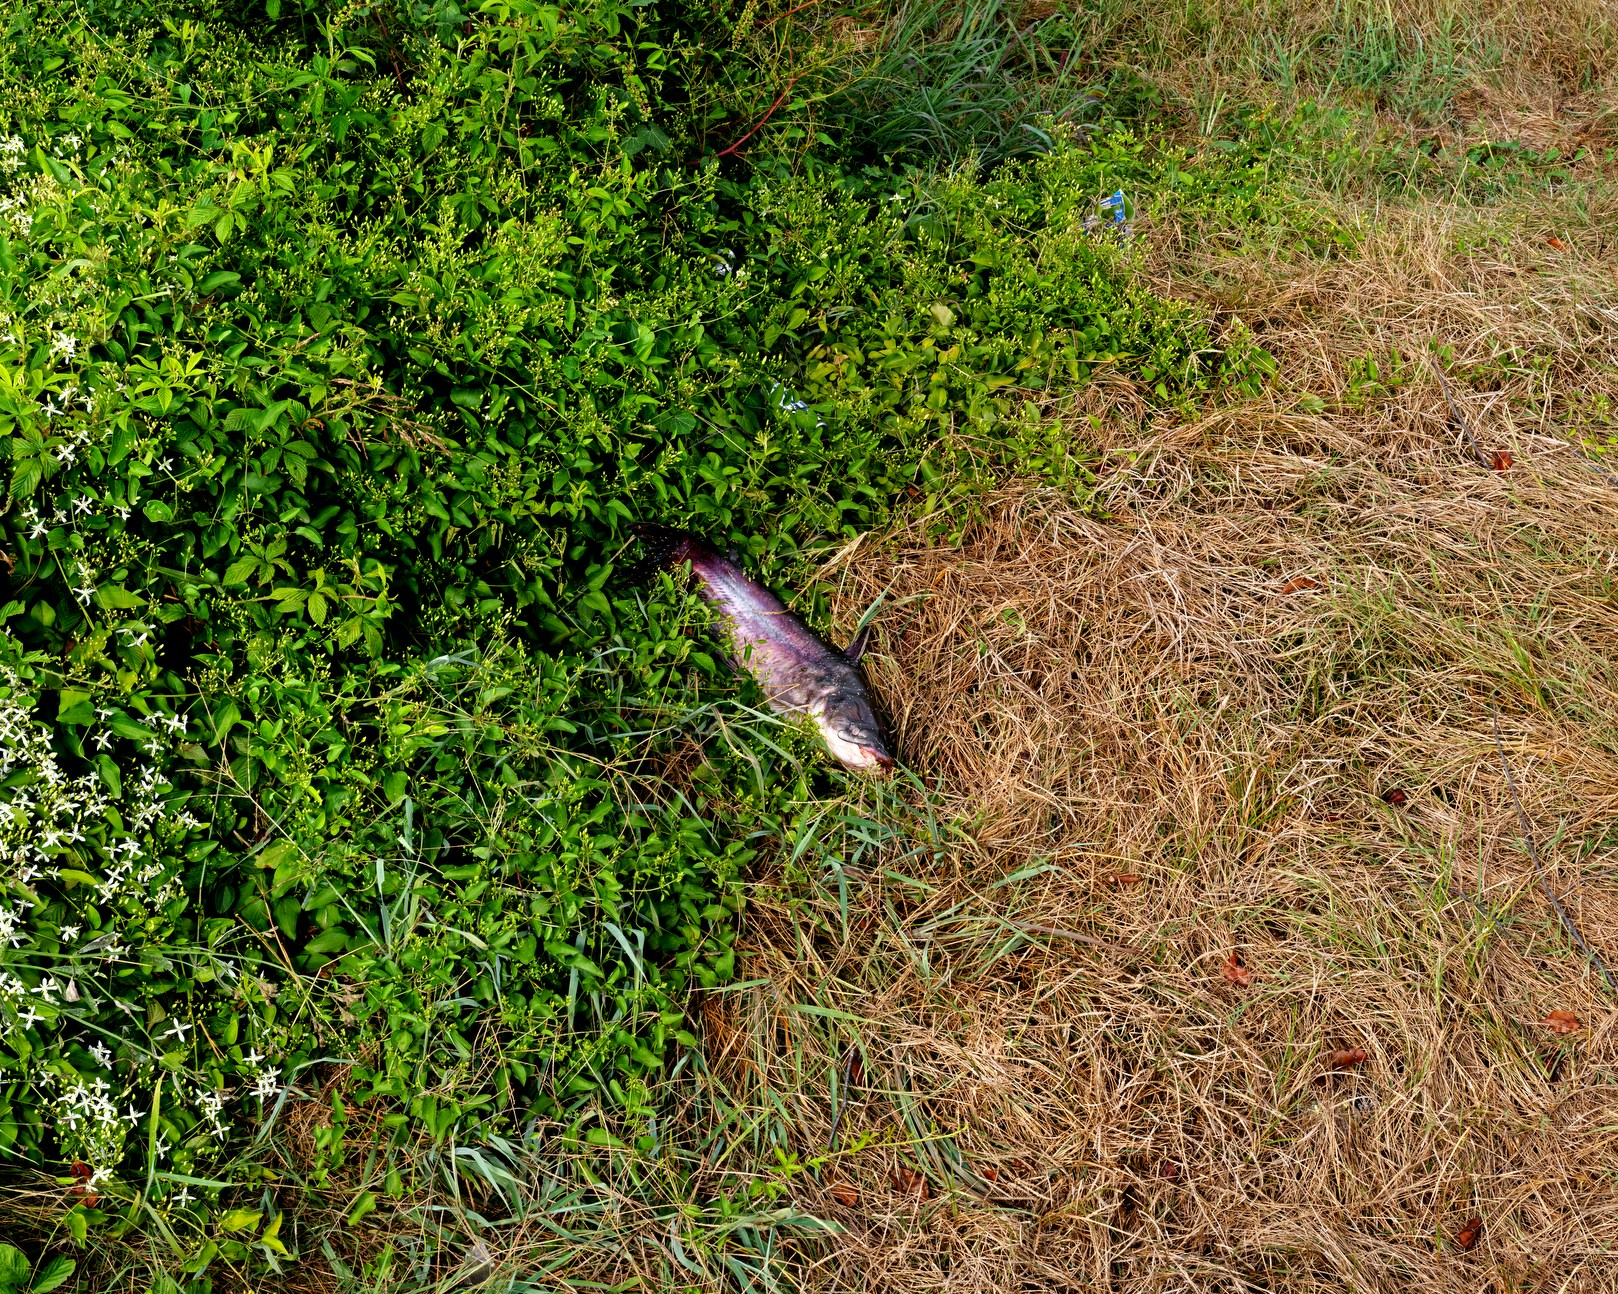 1DECATUR, AL - August 20, 2020: A dead catfish near the bank of the Tennessee River near the 3M Plant in Decatur. CREDIT: Johnathon Kelso for The Intercept.